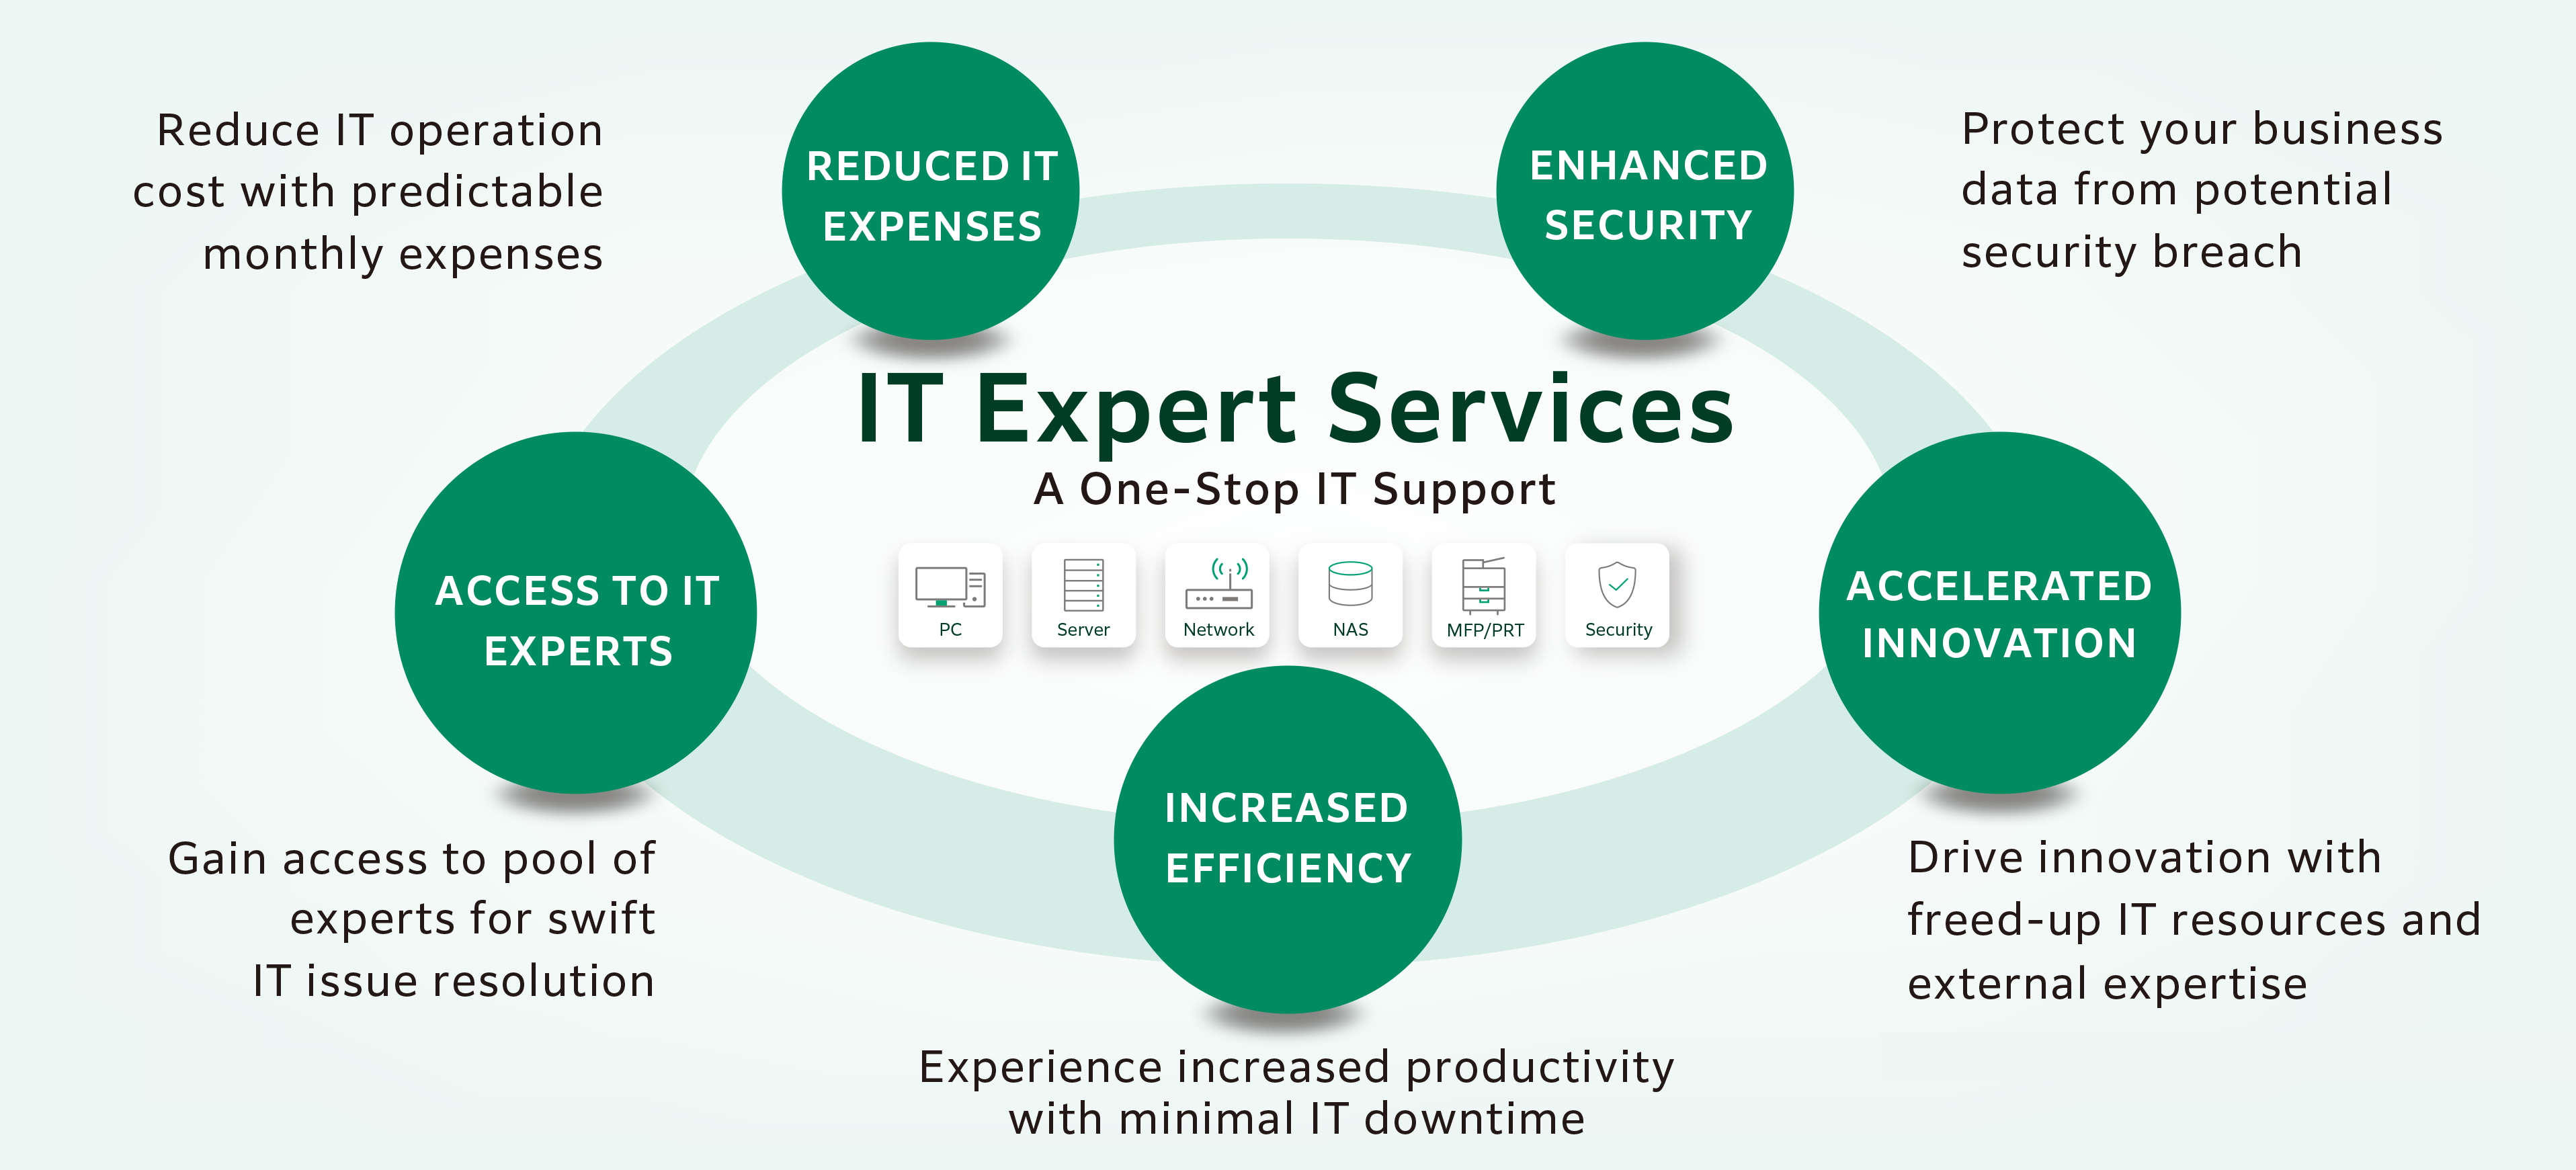 IT Expert Services: A One-stop IT Support